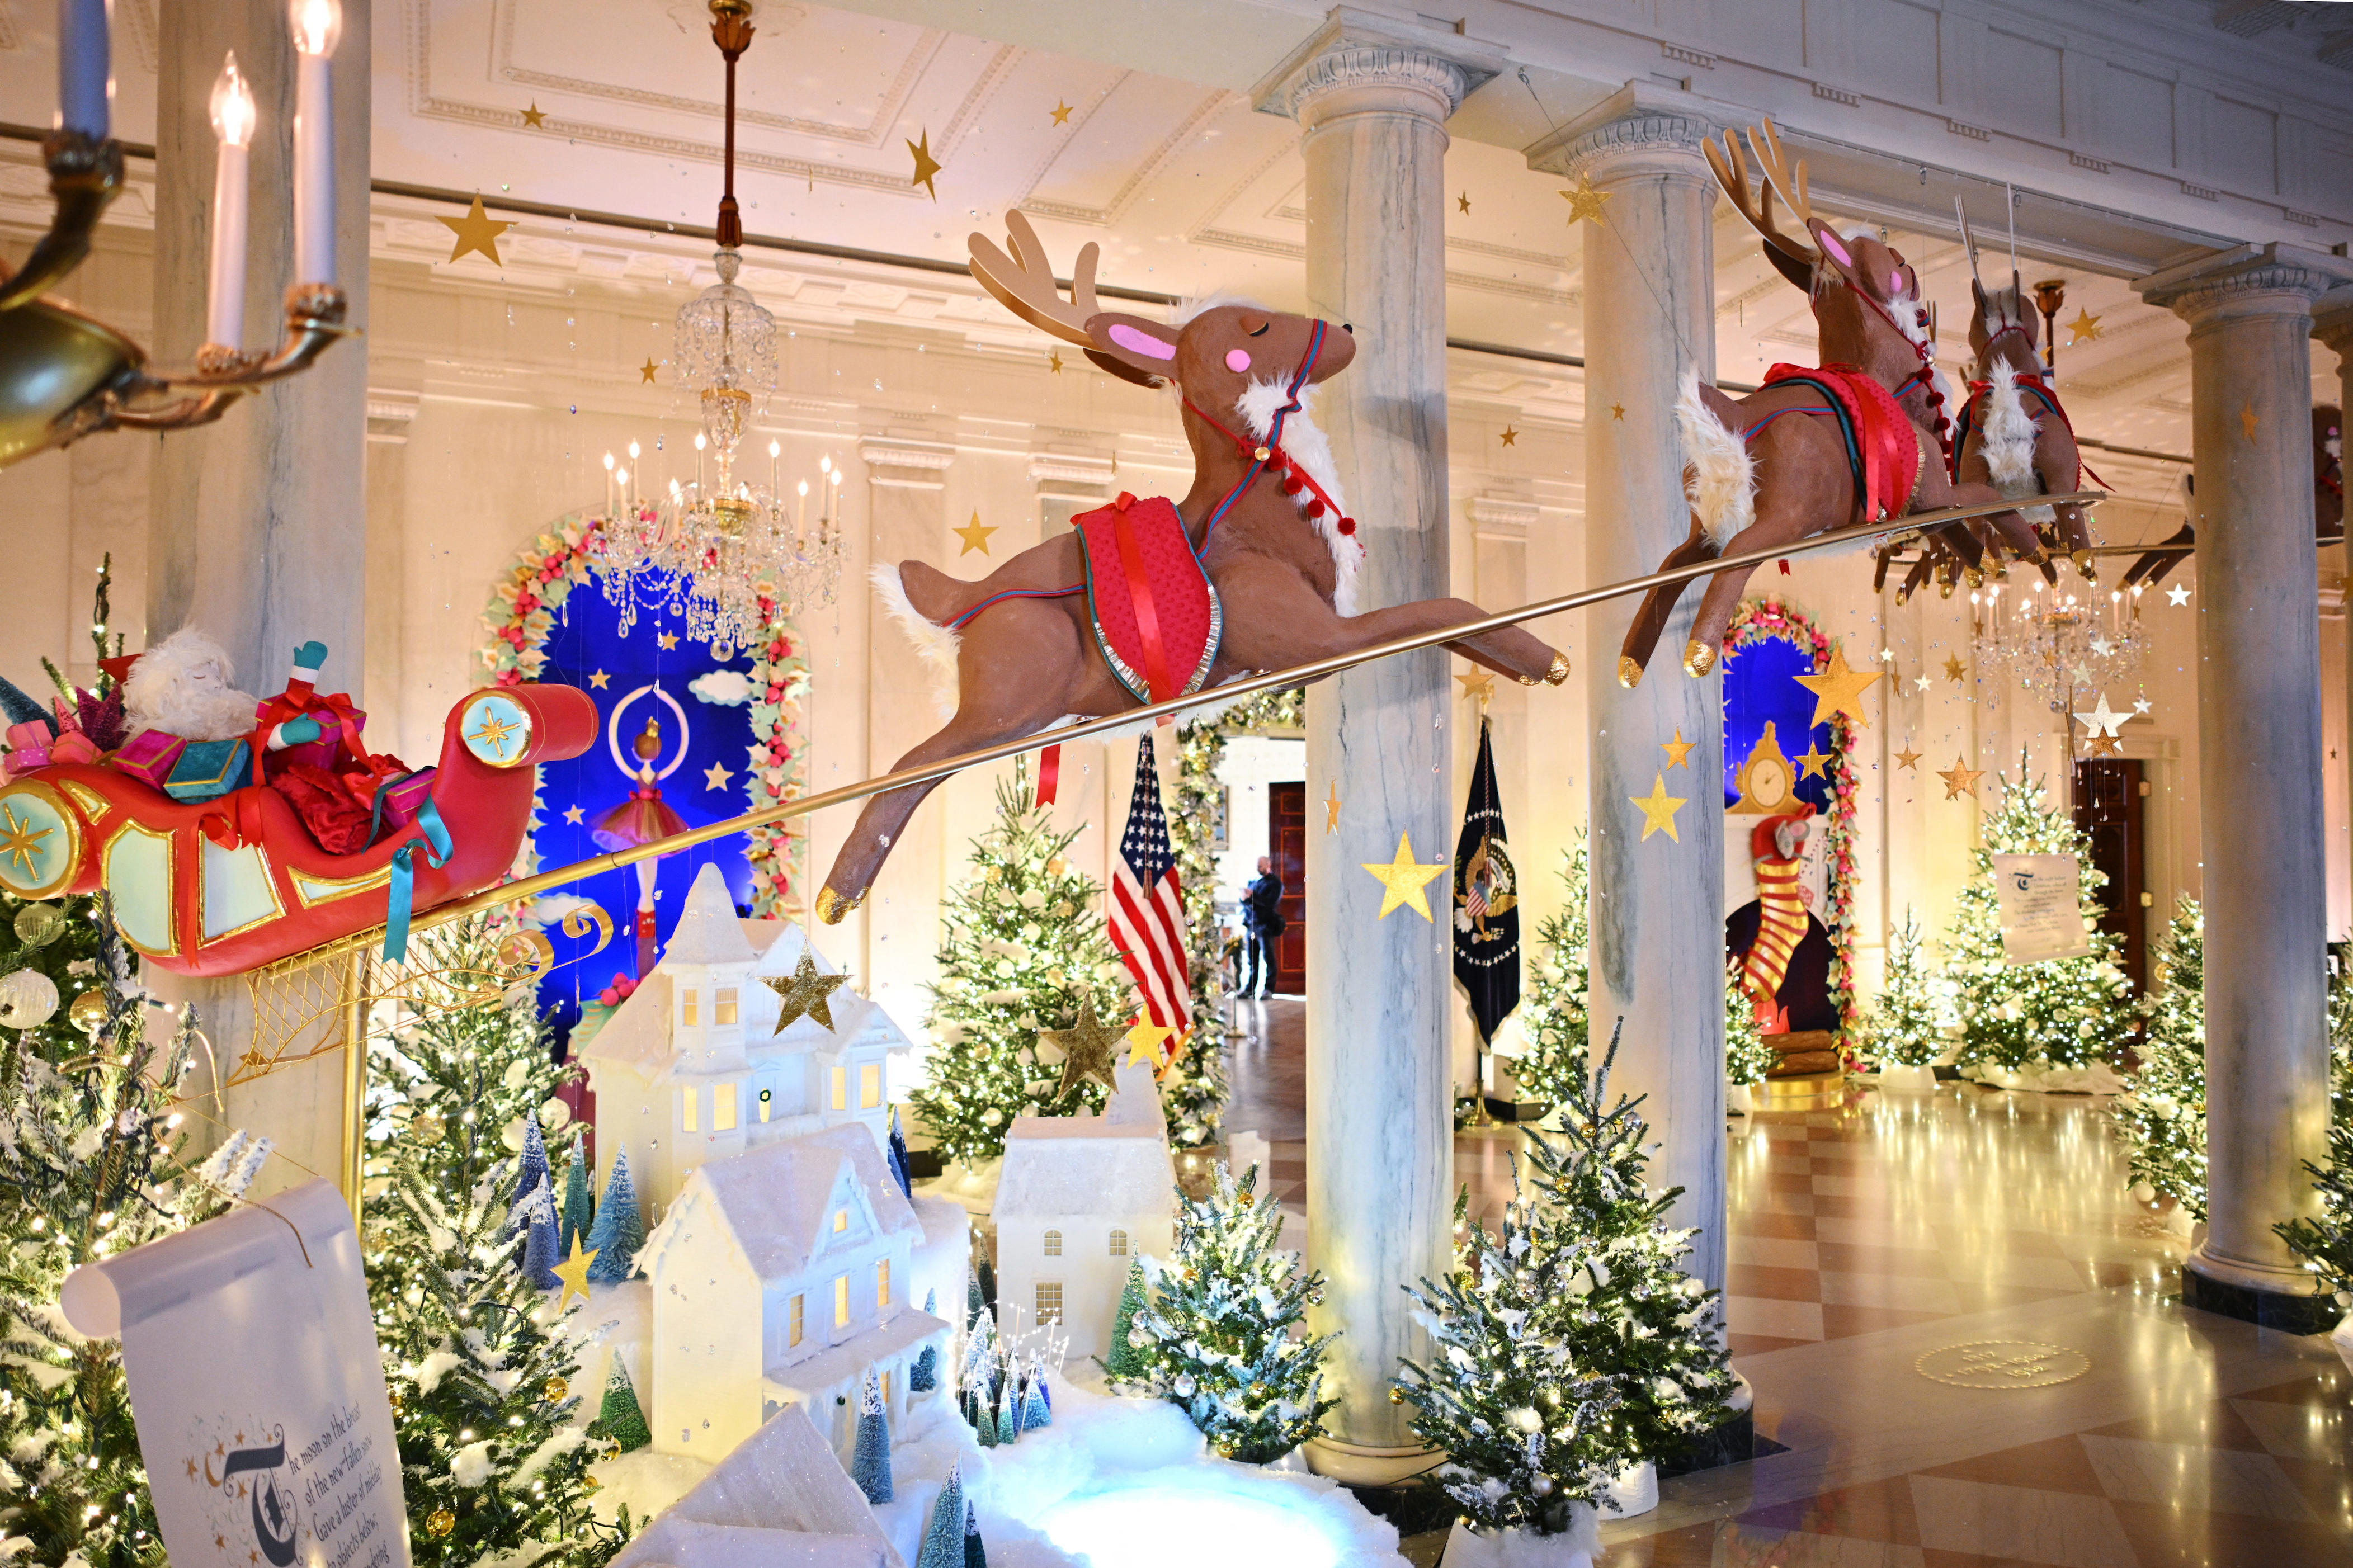 jill biden unveils white house holiday decorations: 98 christmas trees, 34k ornaments